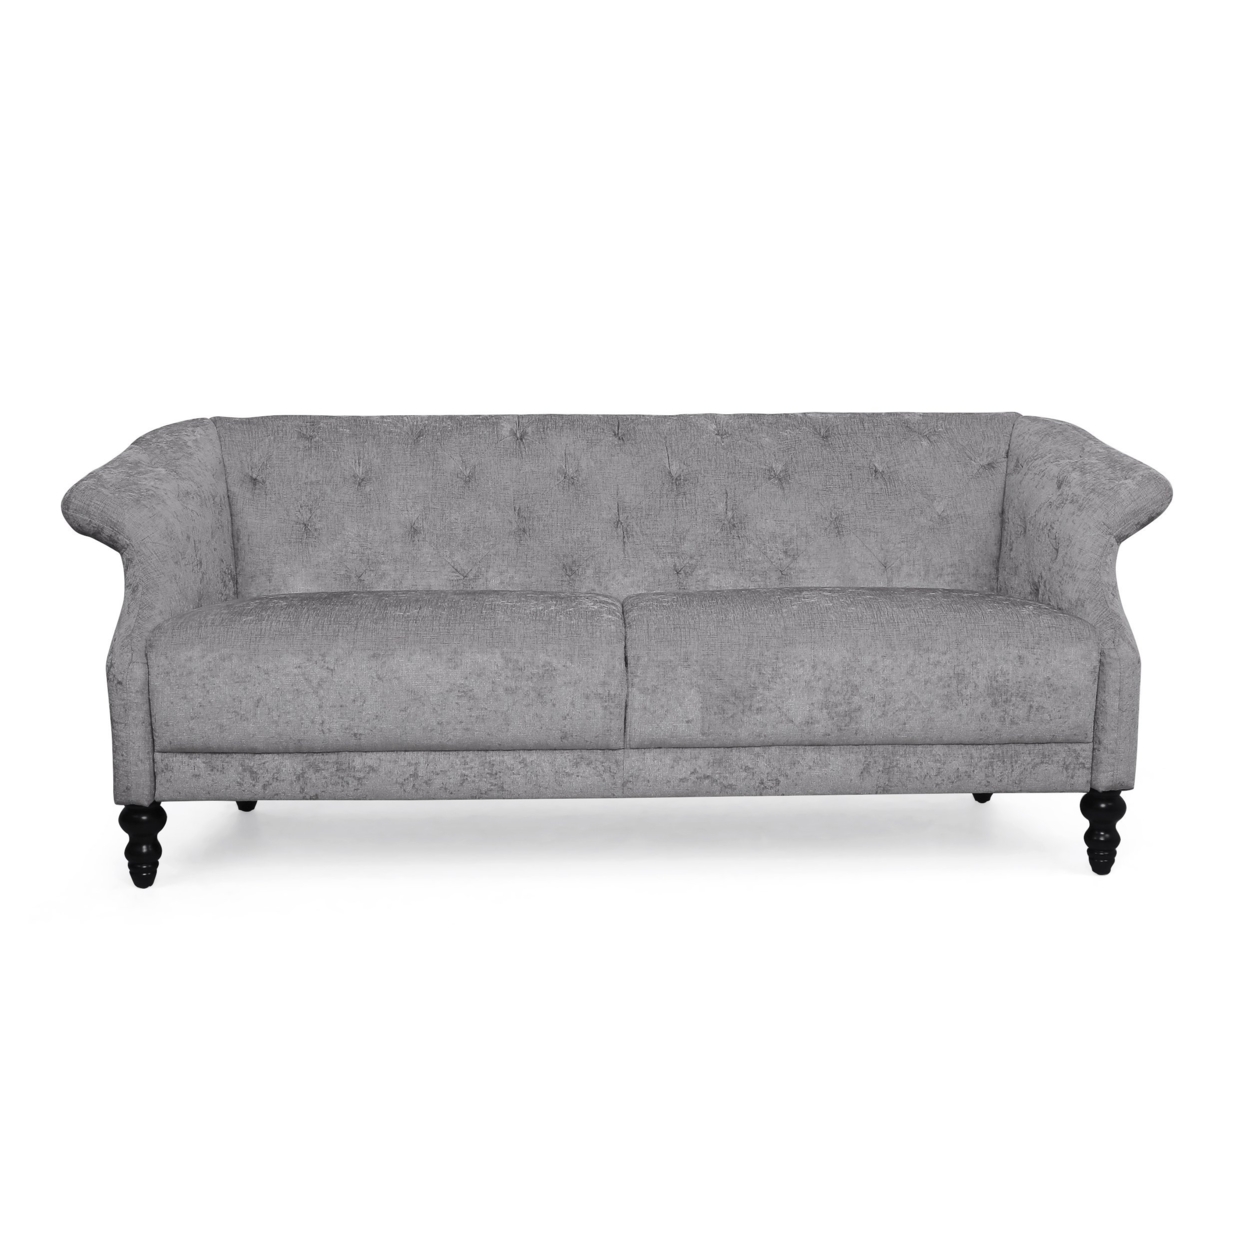 Lavonia Contemporary Tufted 3 Seater Sofa - Dark Brown/light Grey